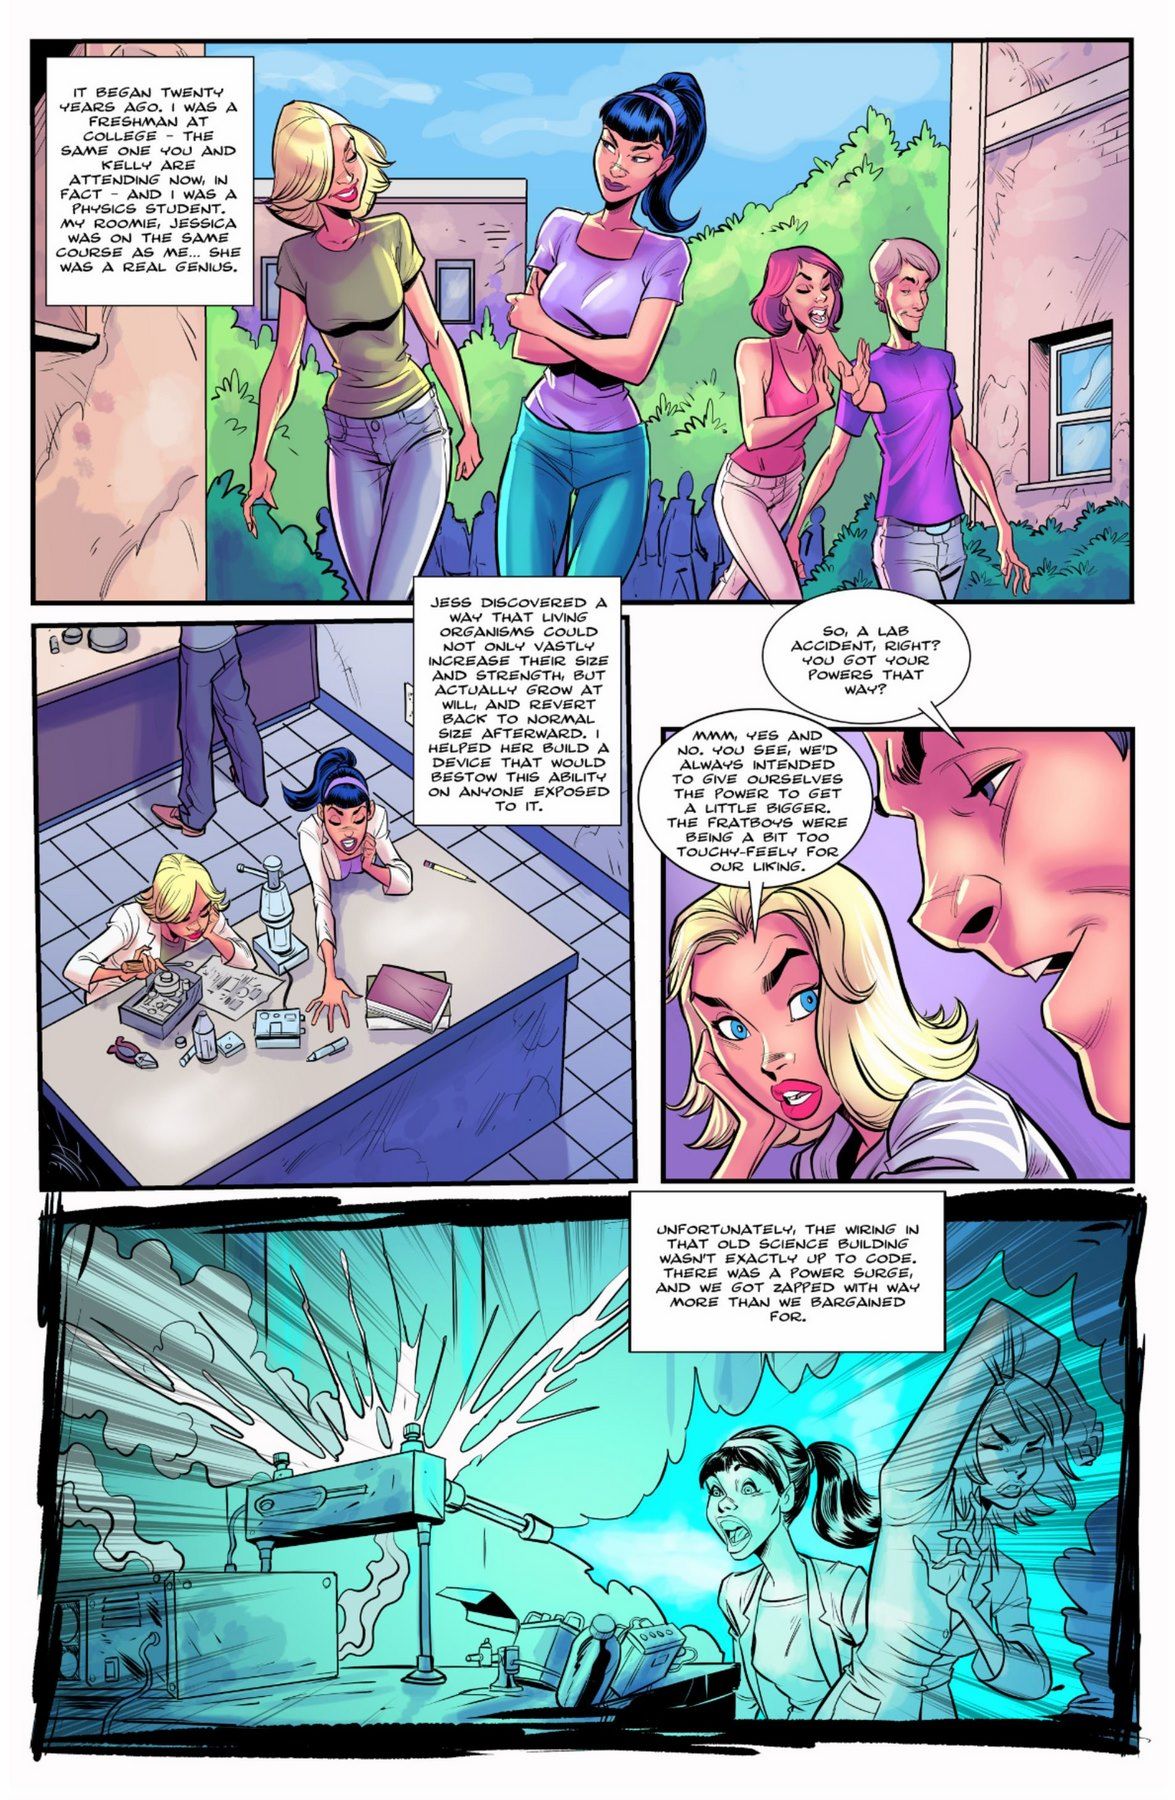 The Superheroines Daughter Issue 3 by BotComics page 4